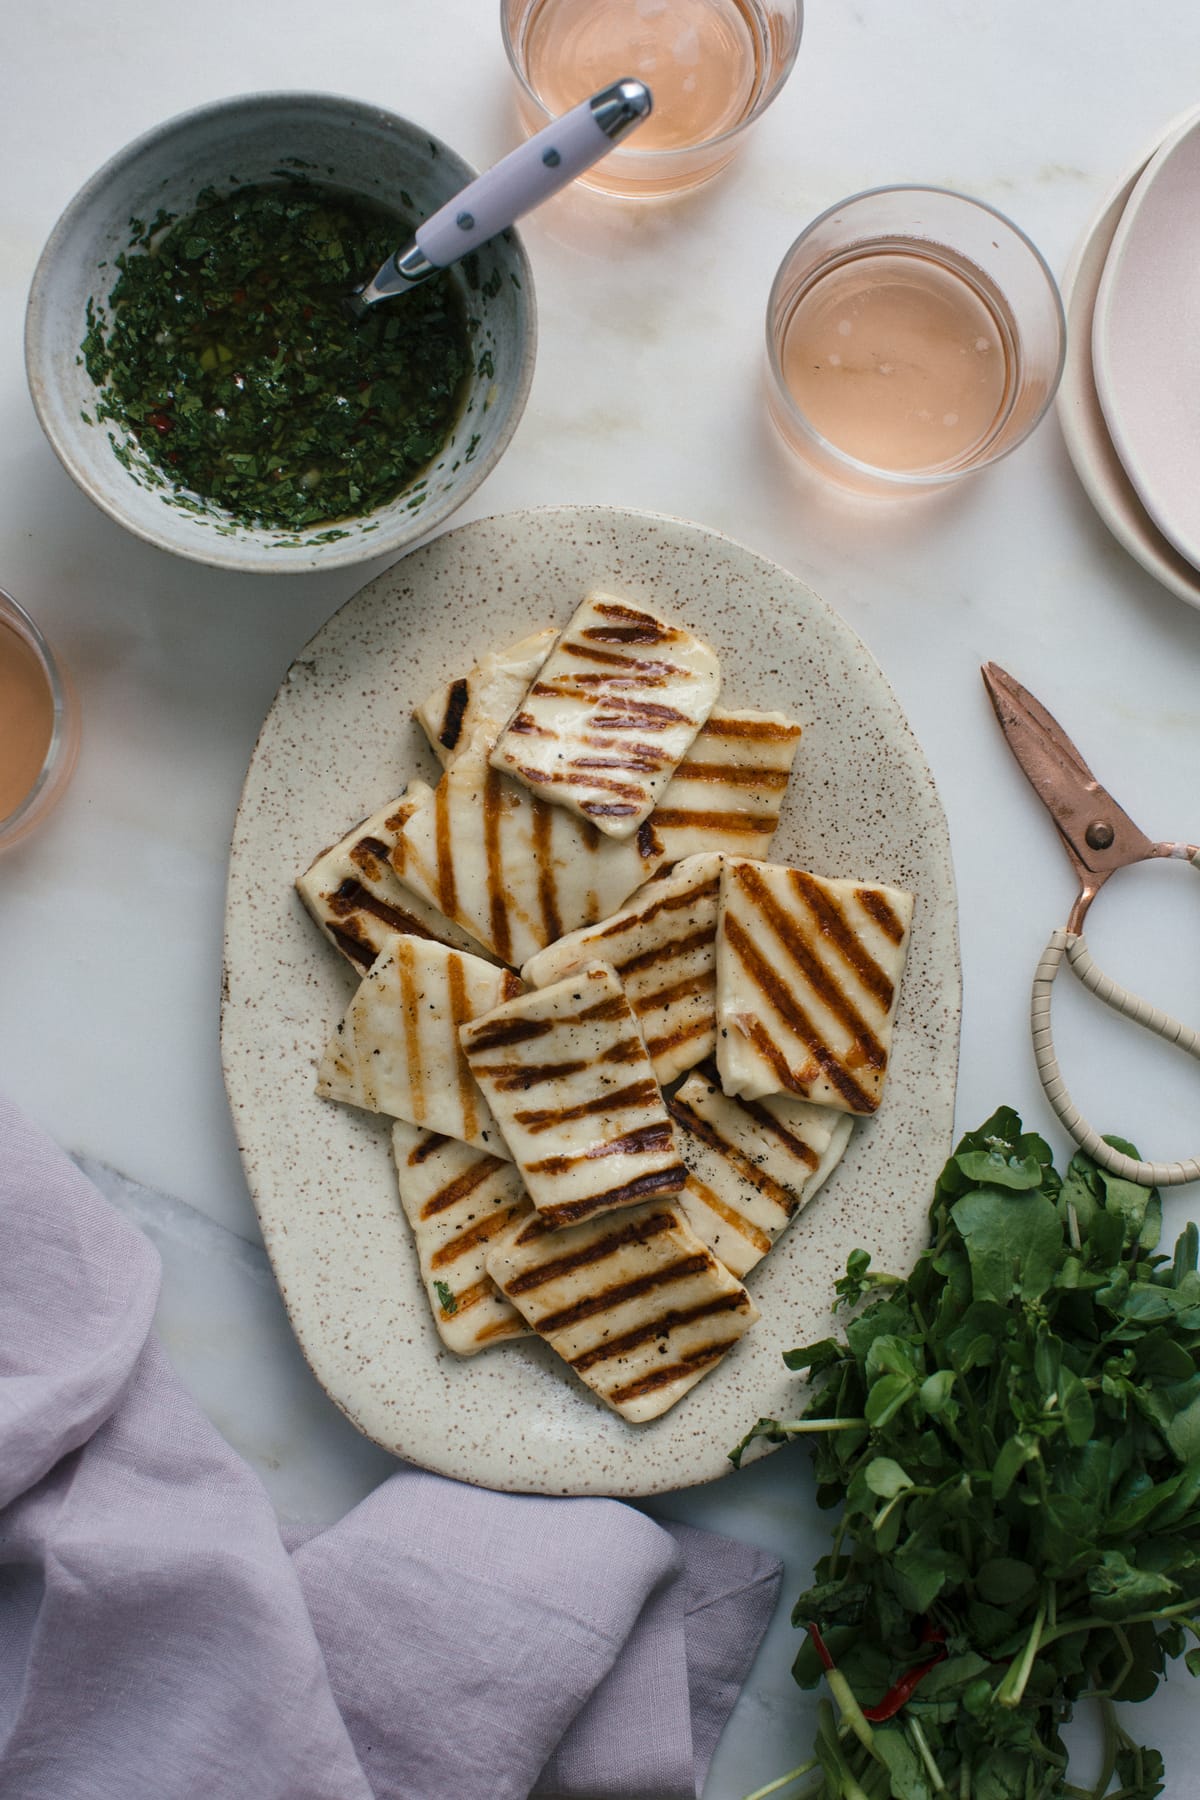 Grilled Halloumi with Watercress Chimichurri